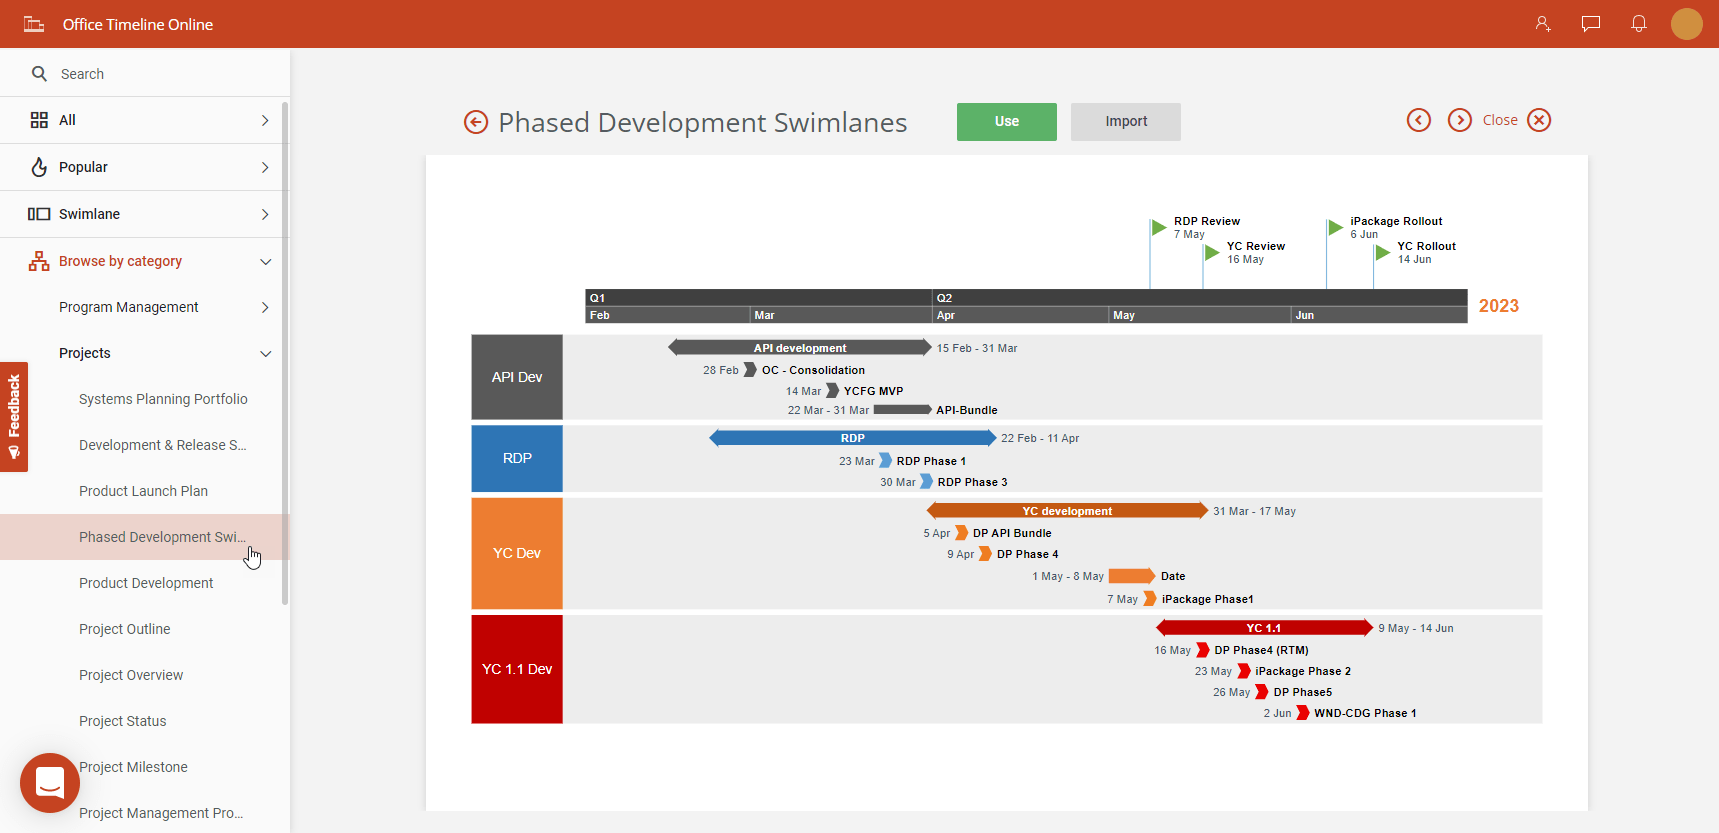 Project template in Office Timeline Online